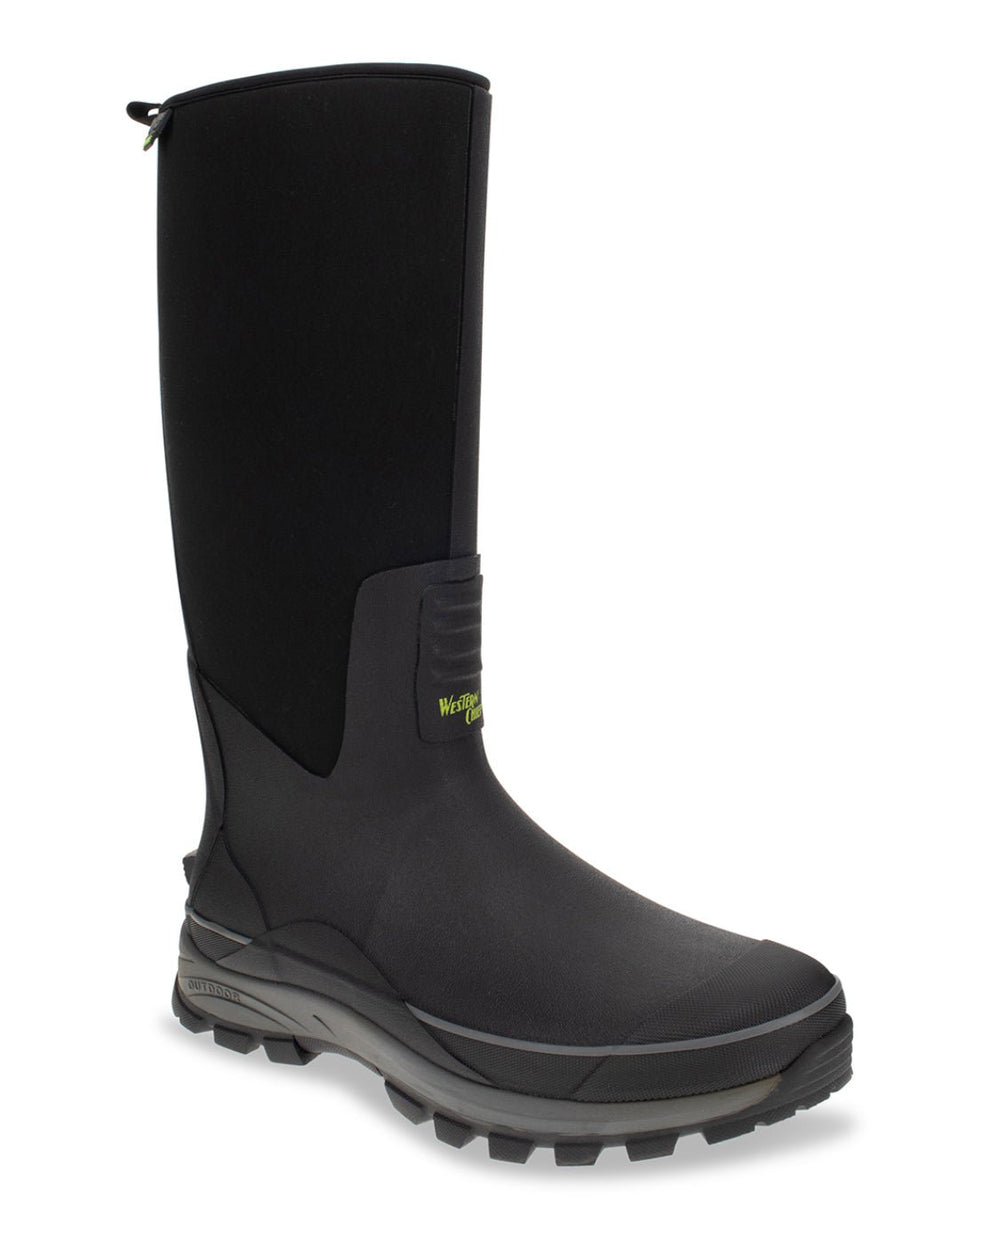 Men's Frontier Tall Neoprene Cold Weather Boot - Black - Western Chief